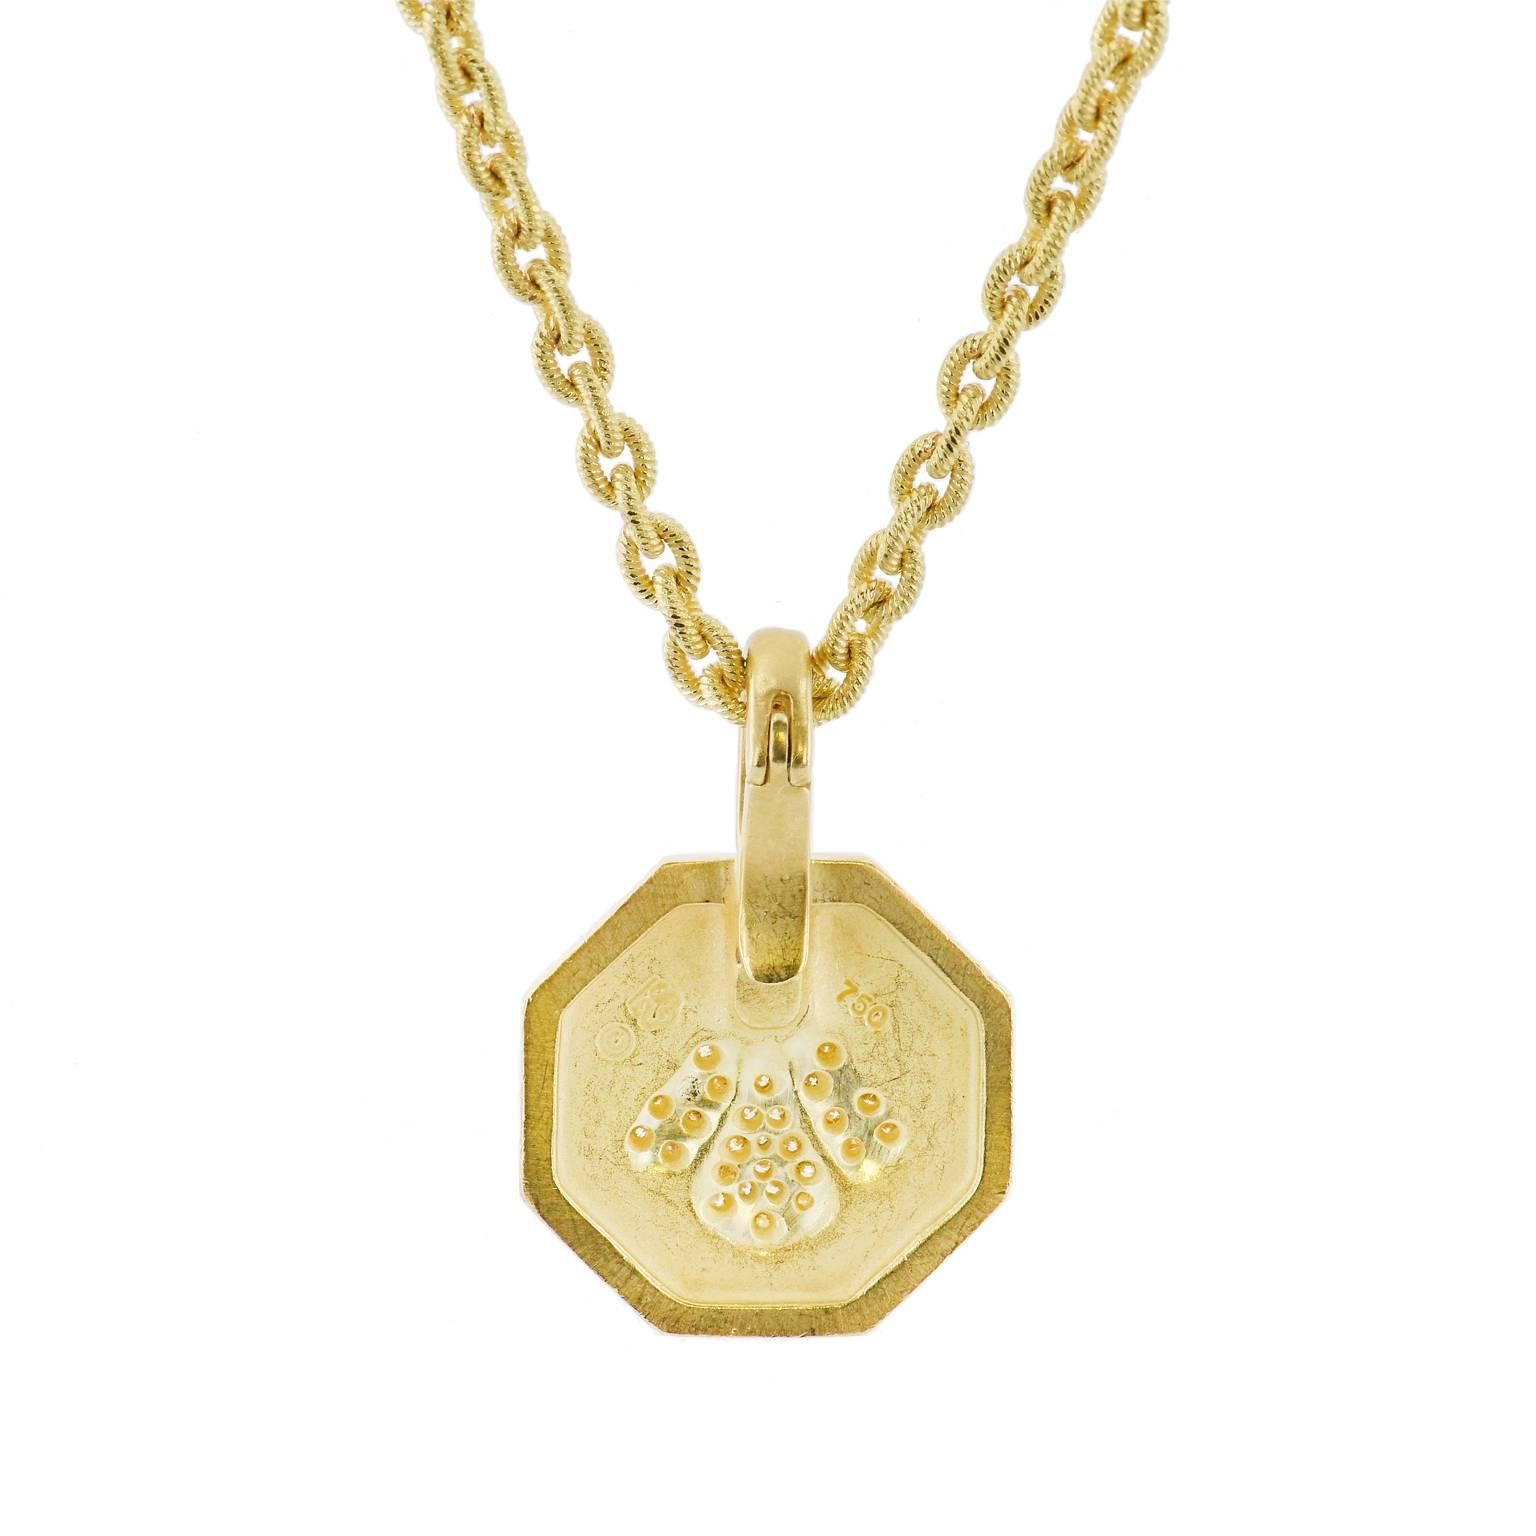 A pendant with spirit, this previously loved Slane octagonal shaped pendant is fashioned in 18 karat yellow gold and features 0.21 carat of pave-set diamond in the shape of a bee (G/H/SI). Strung on an 18 inch chain, this pendant necklace is